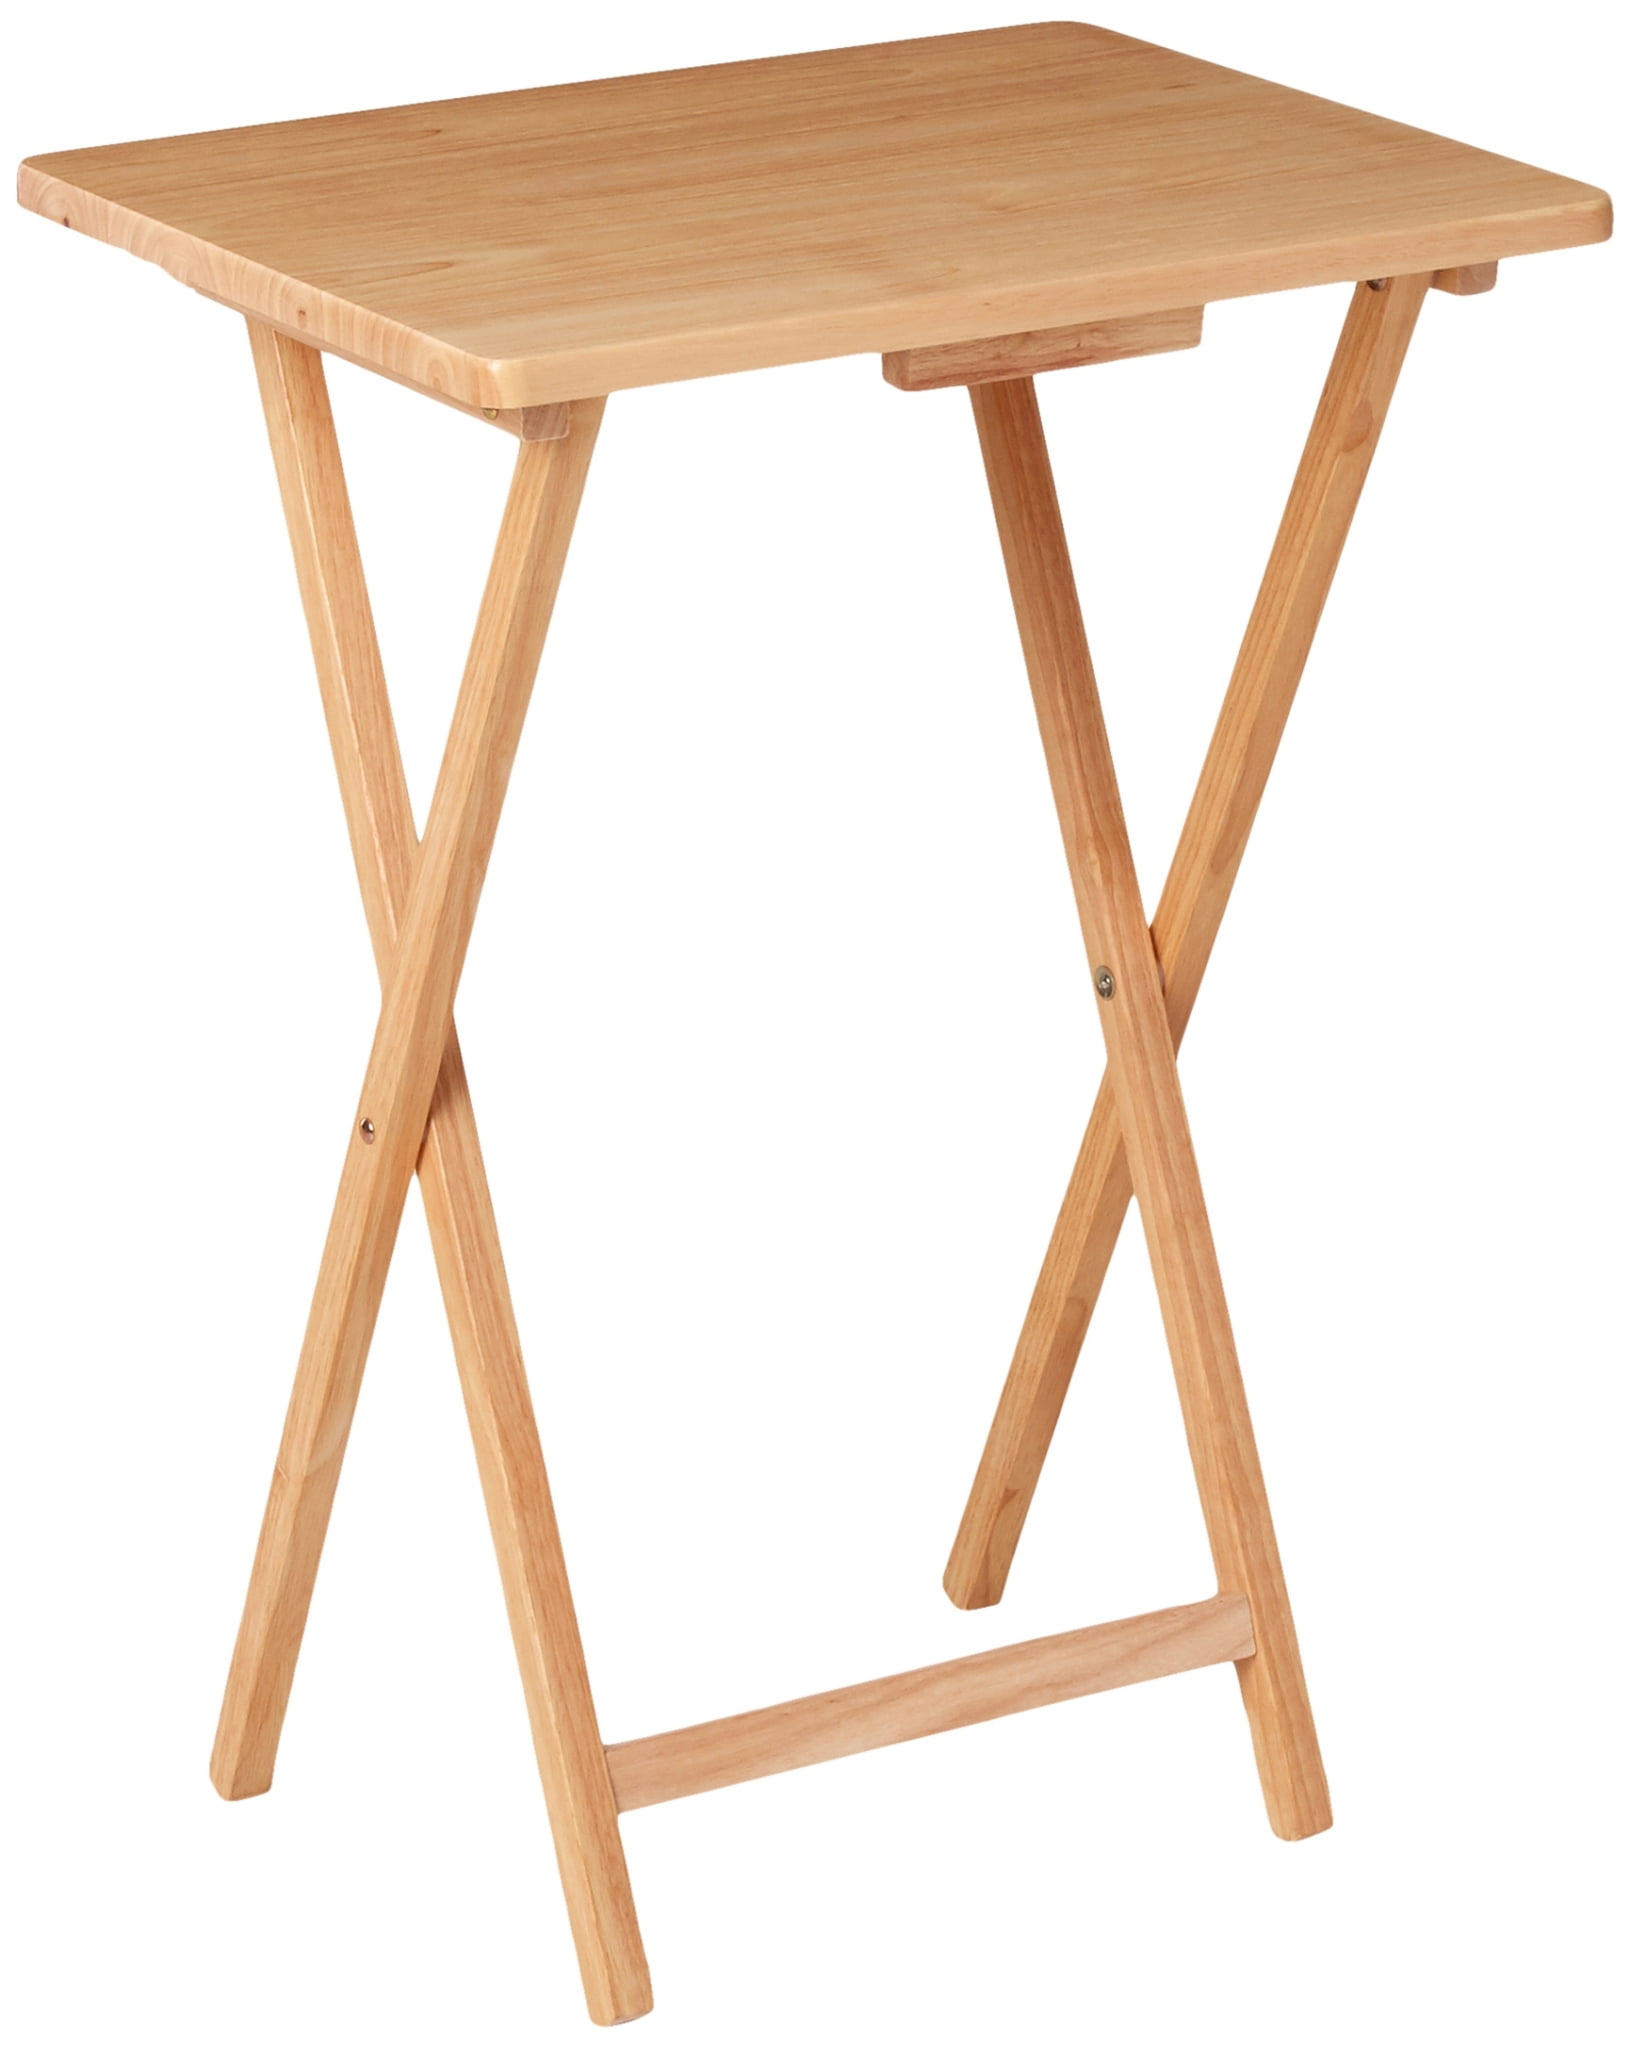 Folding TV tray table - Natural wood. Colour: beige